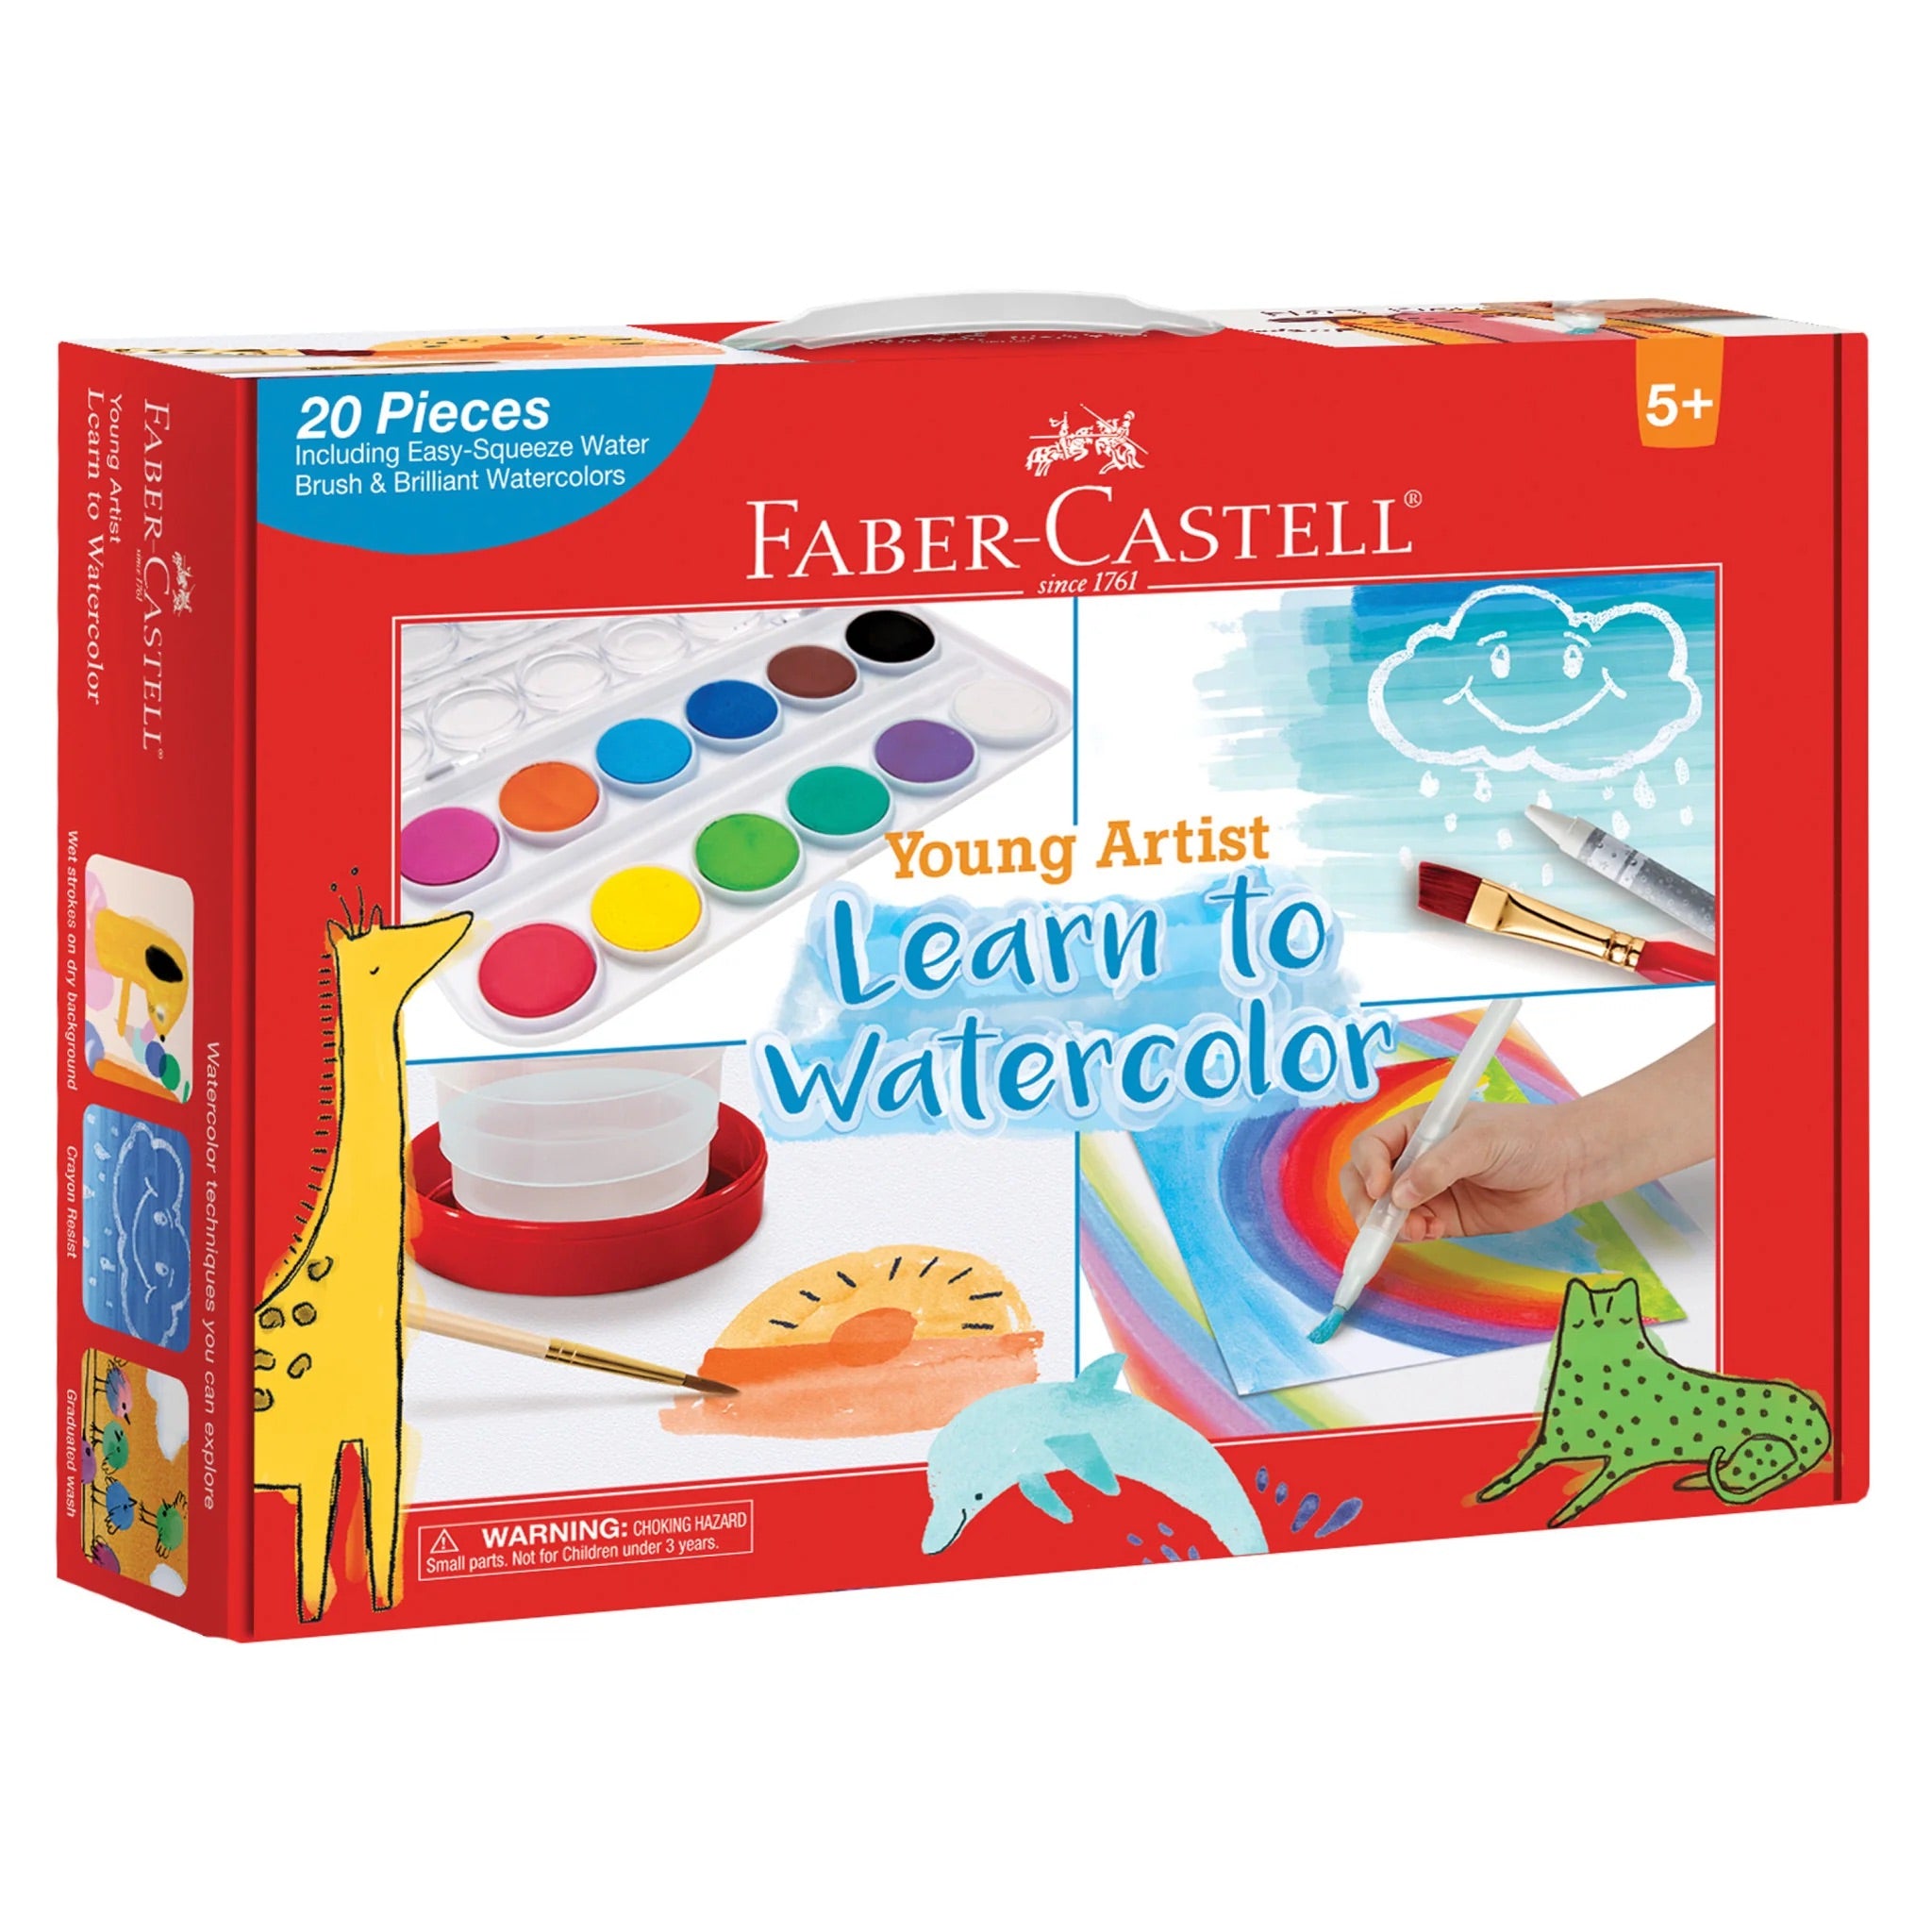 Young Artist Learn to Watercolor by Faber Castell #14332